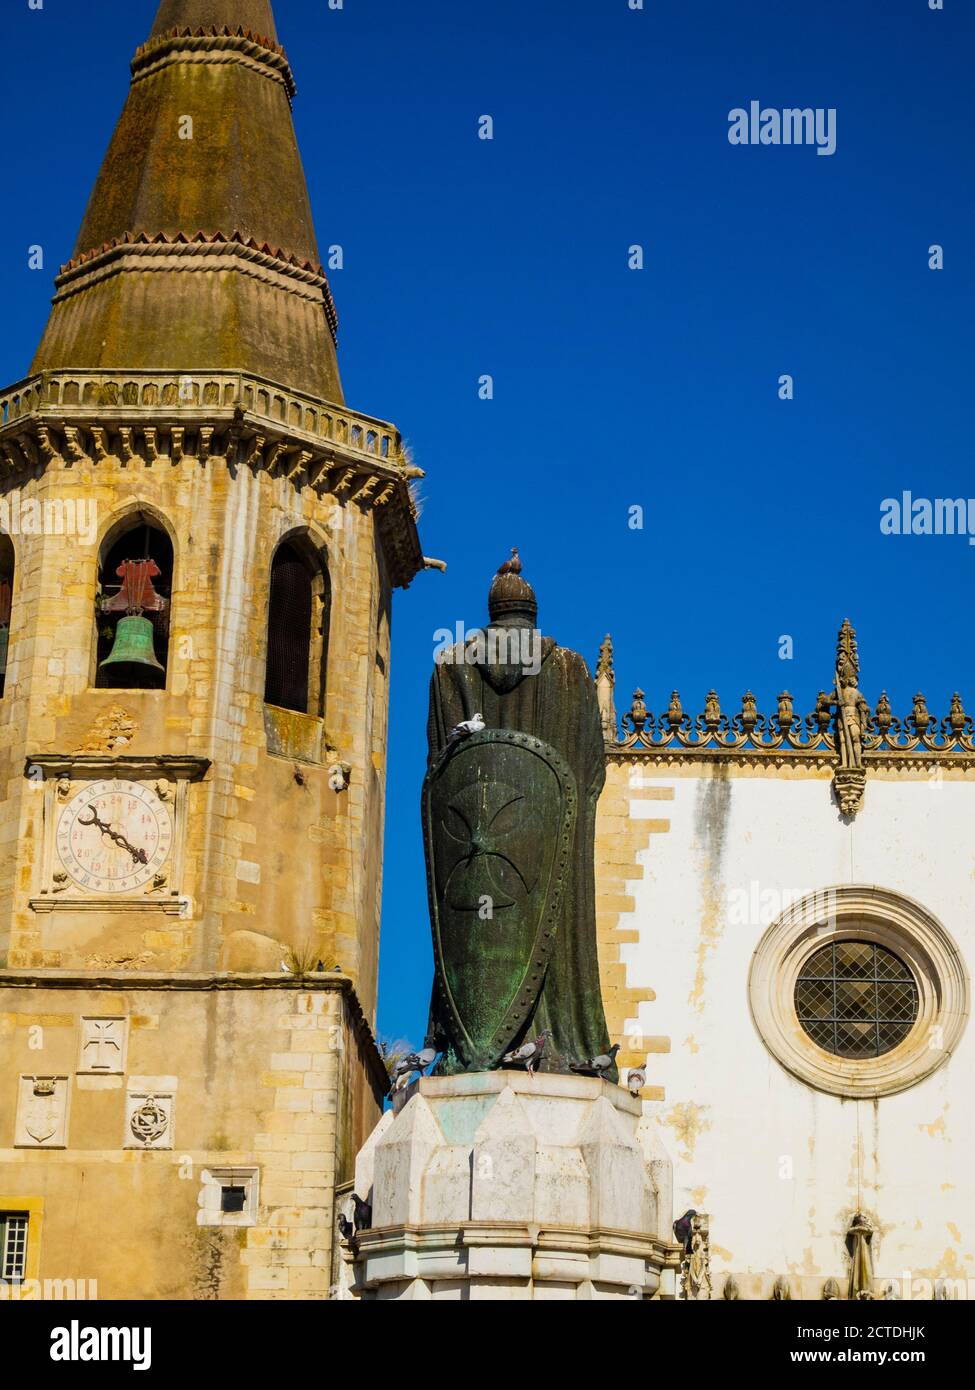 The octagonal bell tower of Saint John the Baptist church and Christ Order knight D.Gualdim Pais statue on Republic Square in old town. Tomar Portugal Stock Photo